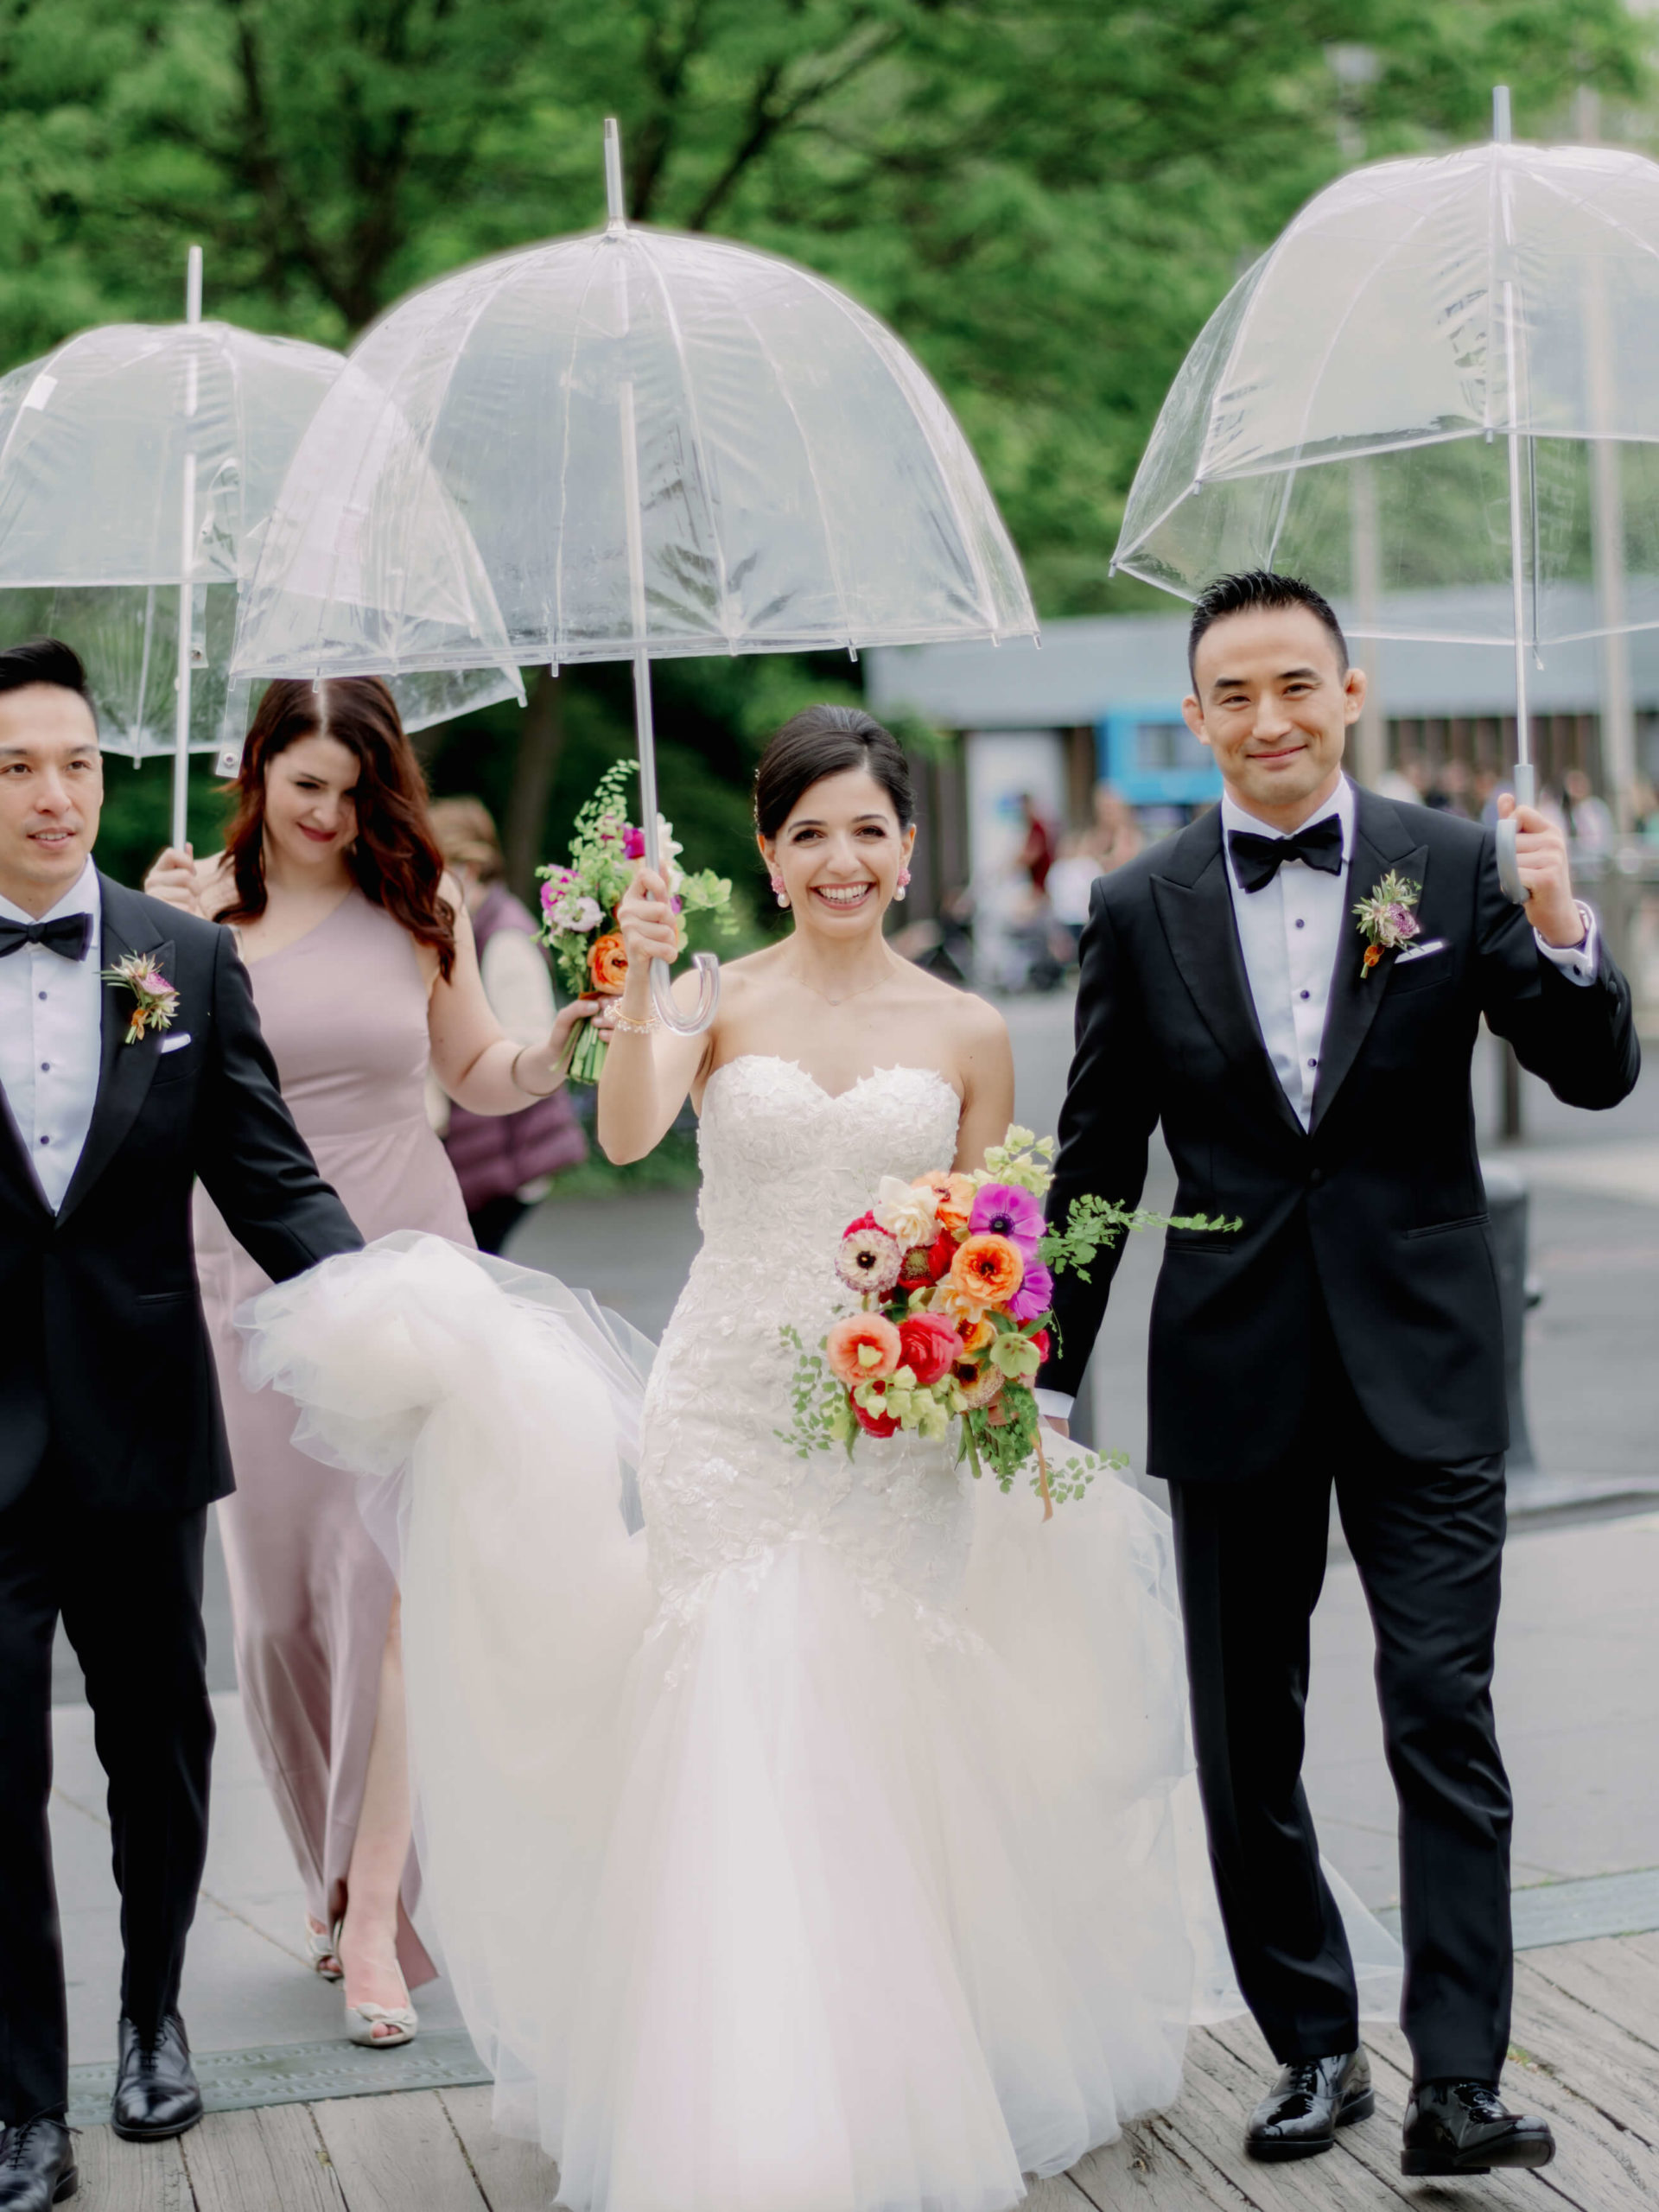 The bride and groom are walking in the street with transparent umbrellas. Editorial wedding image by Jenny Fu Studio